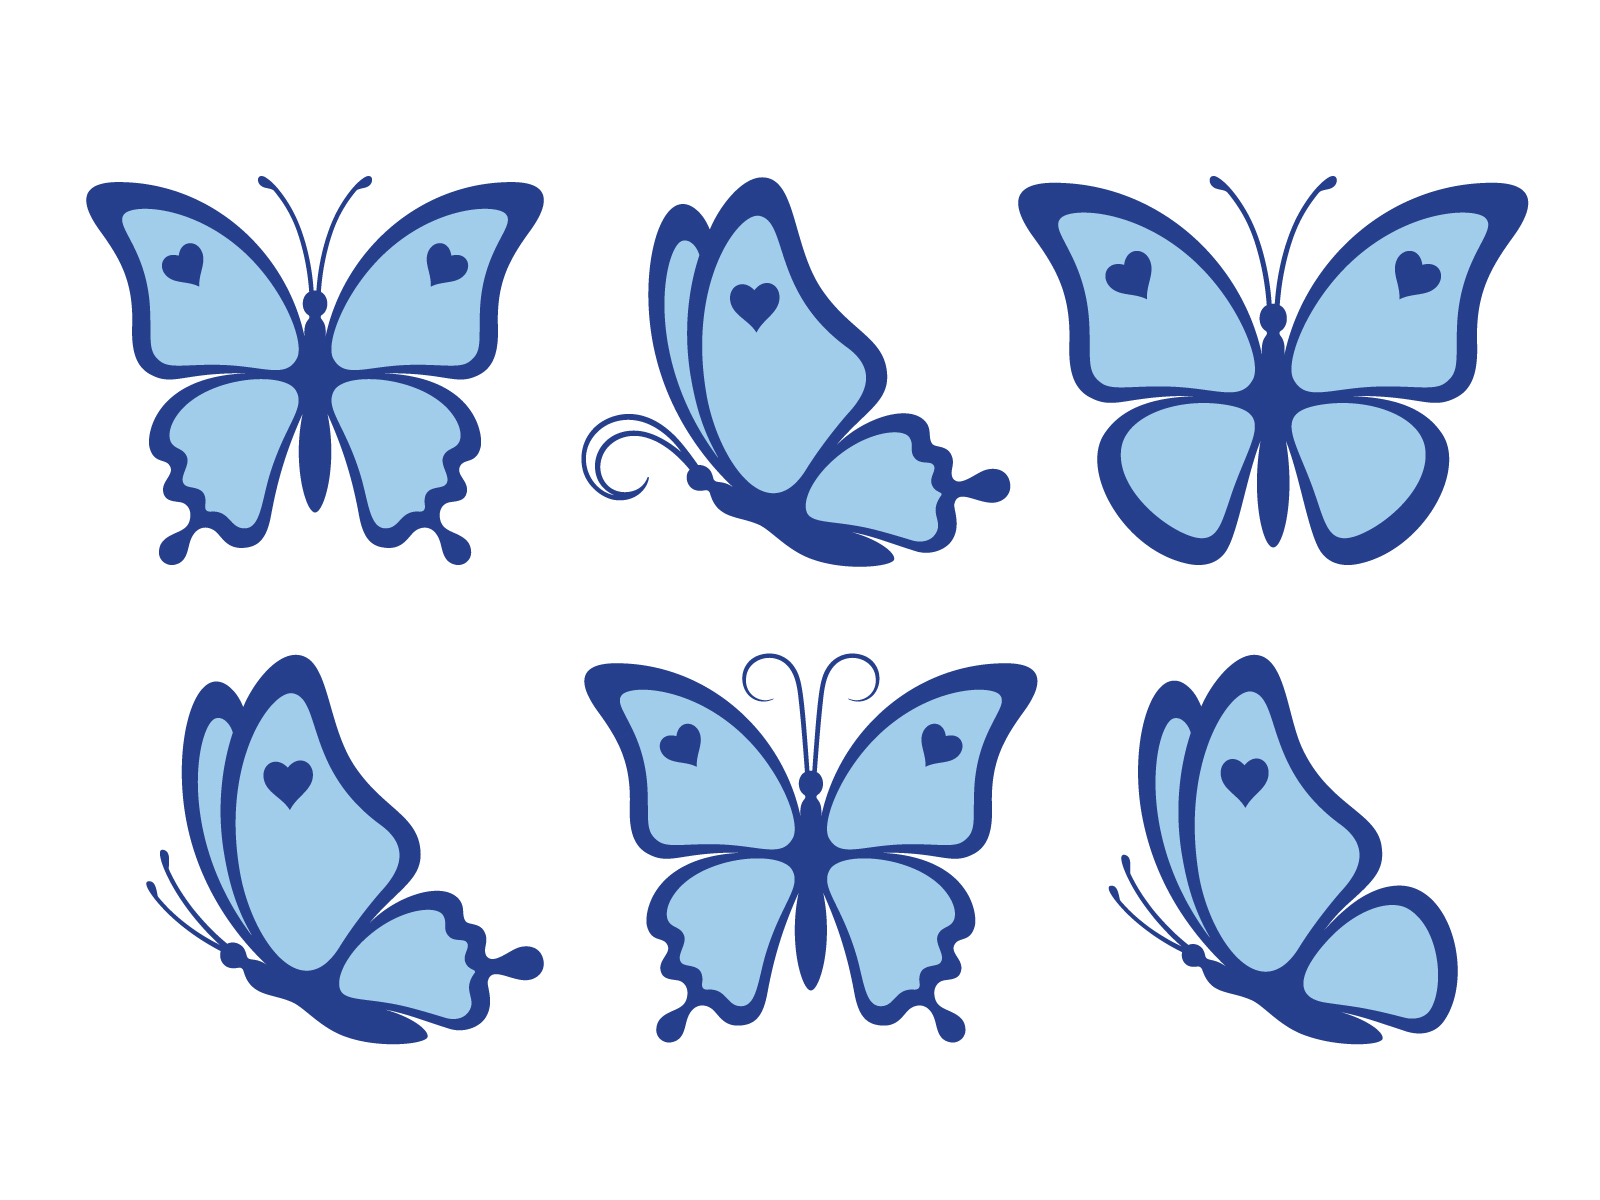 Colored paper butterflies by Olena Mostova on Dribbble